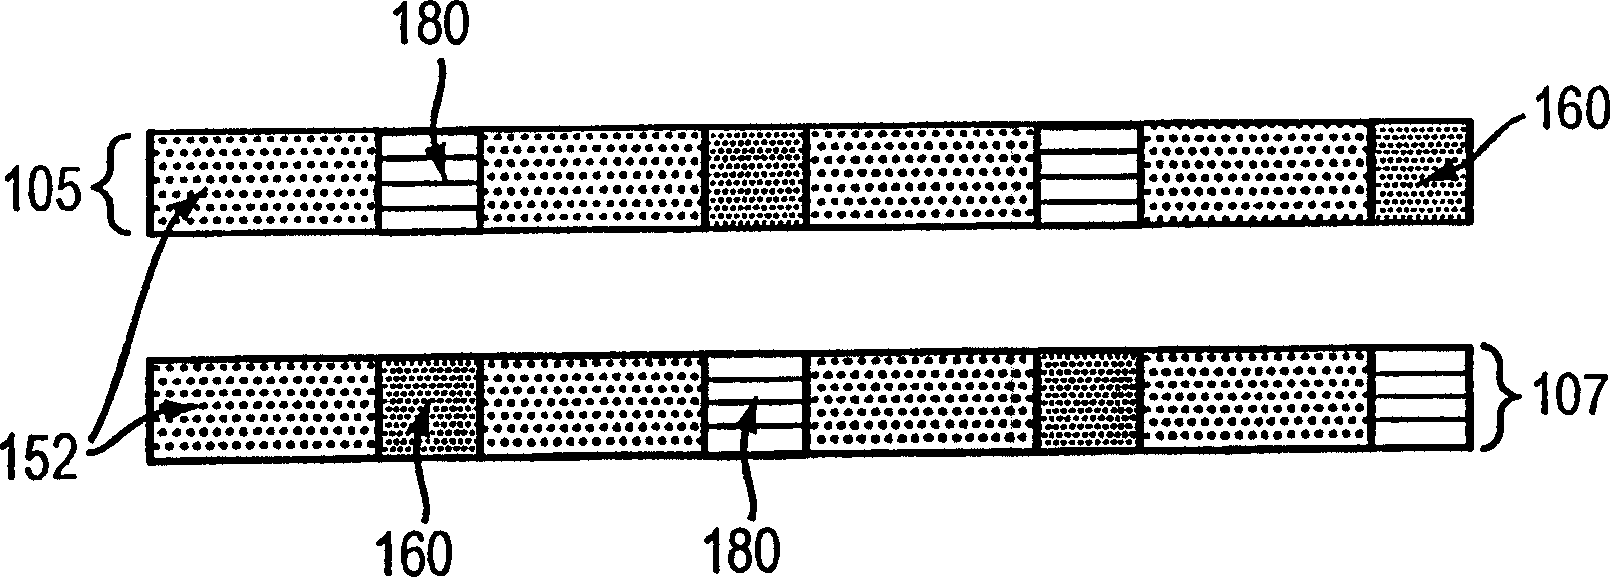 Photovoltaic cell interconnection